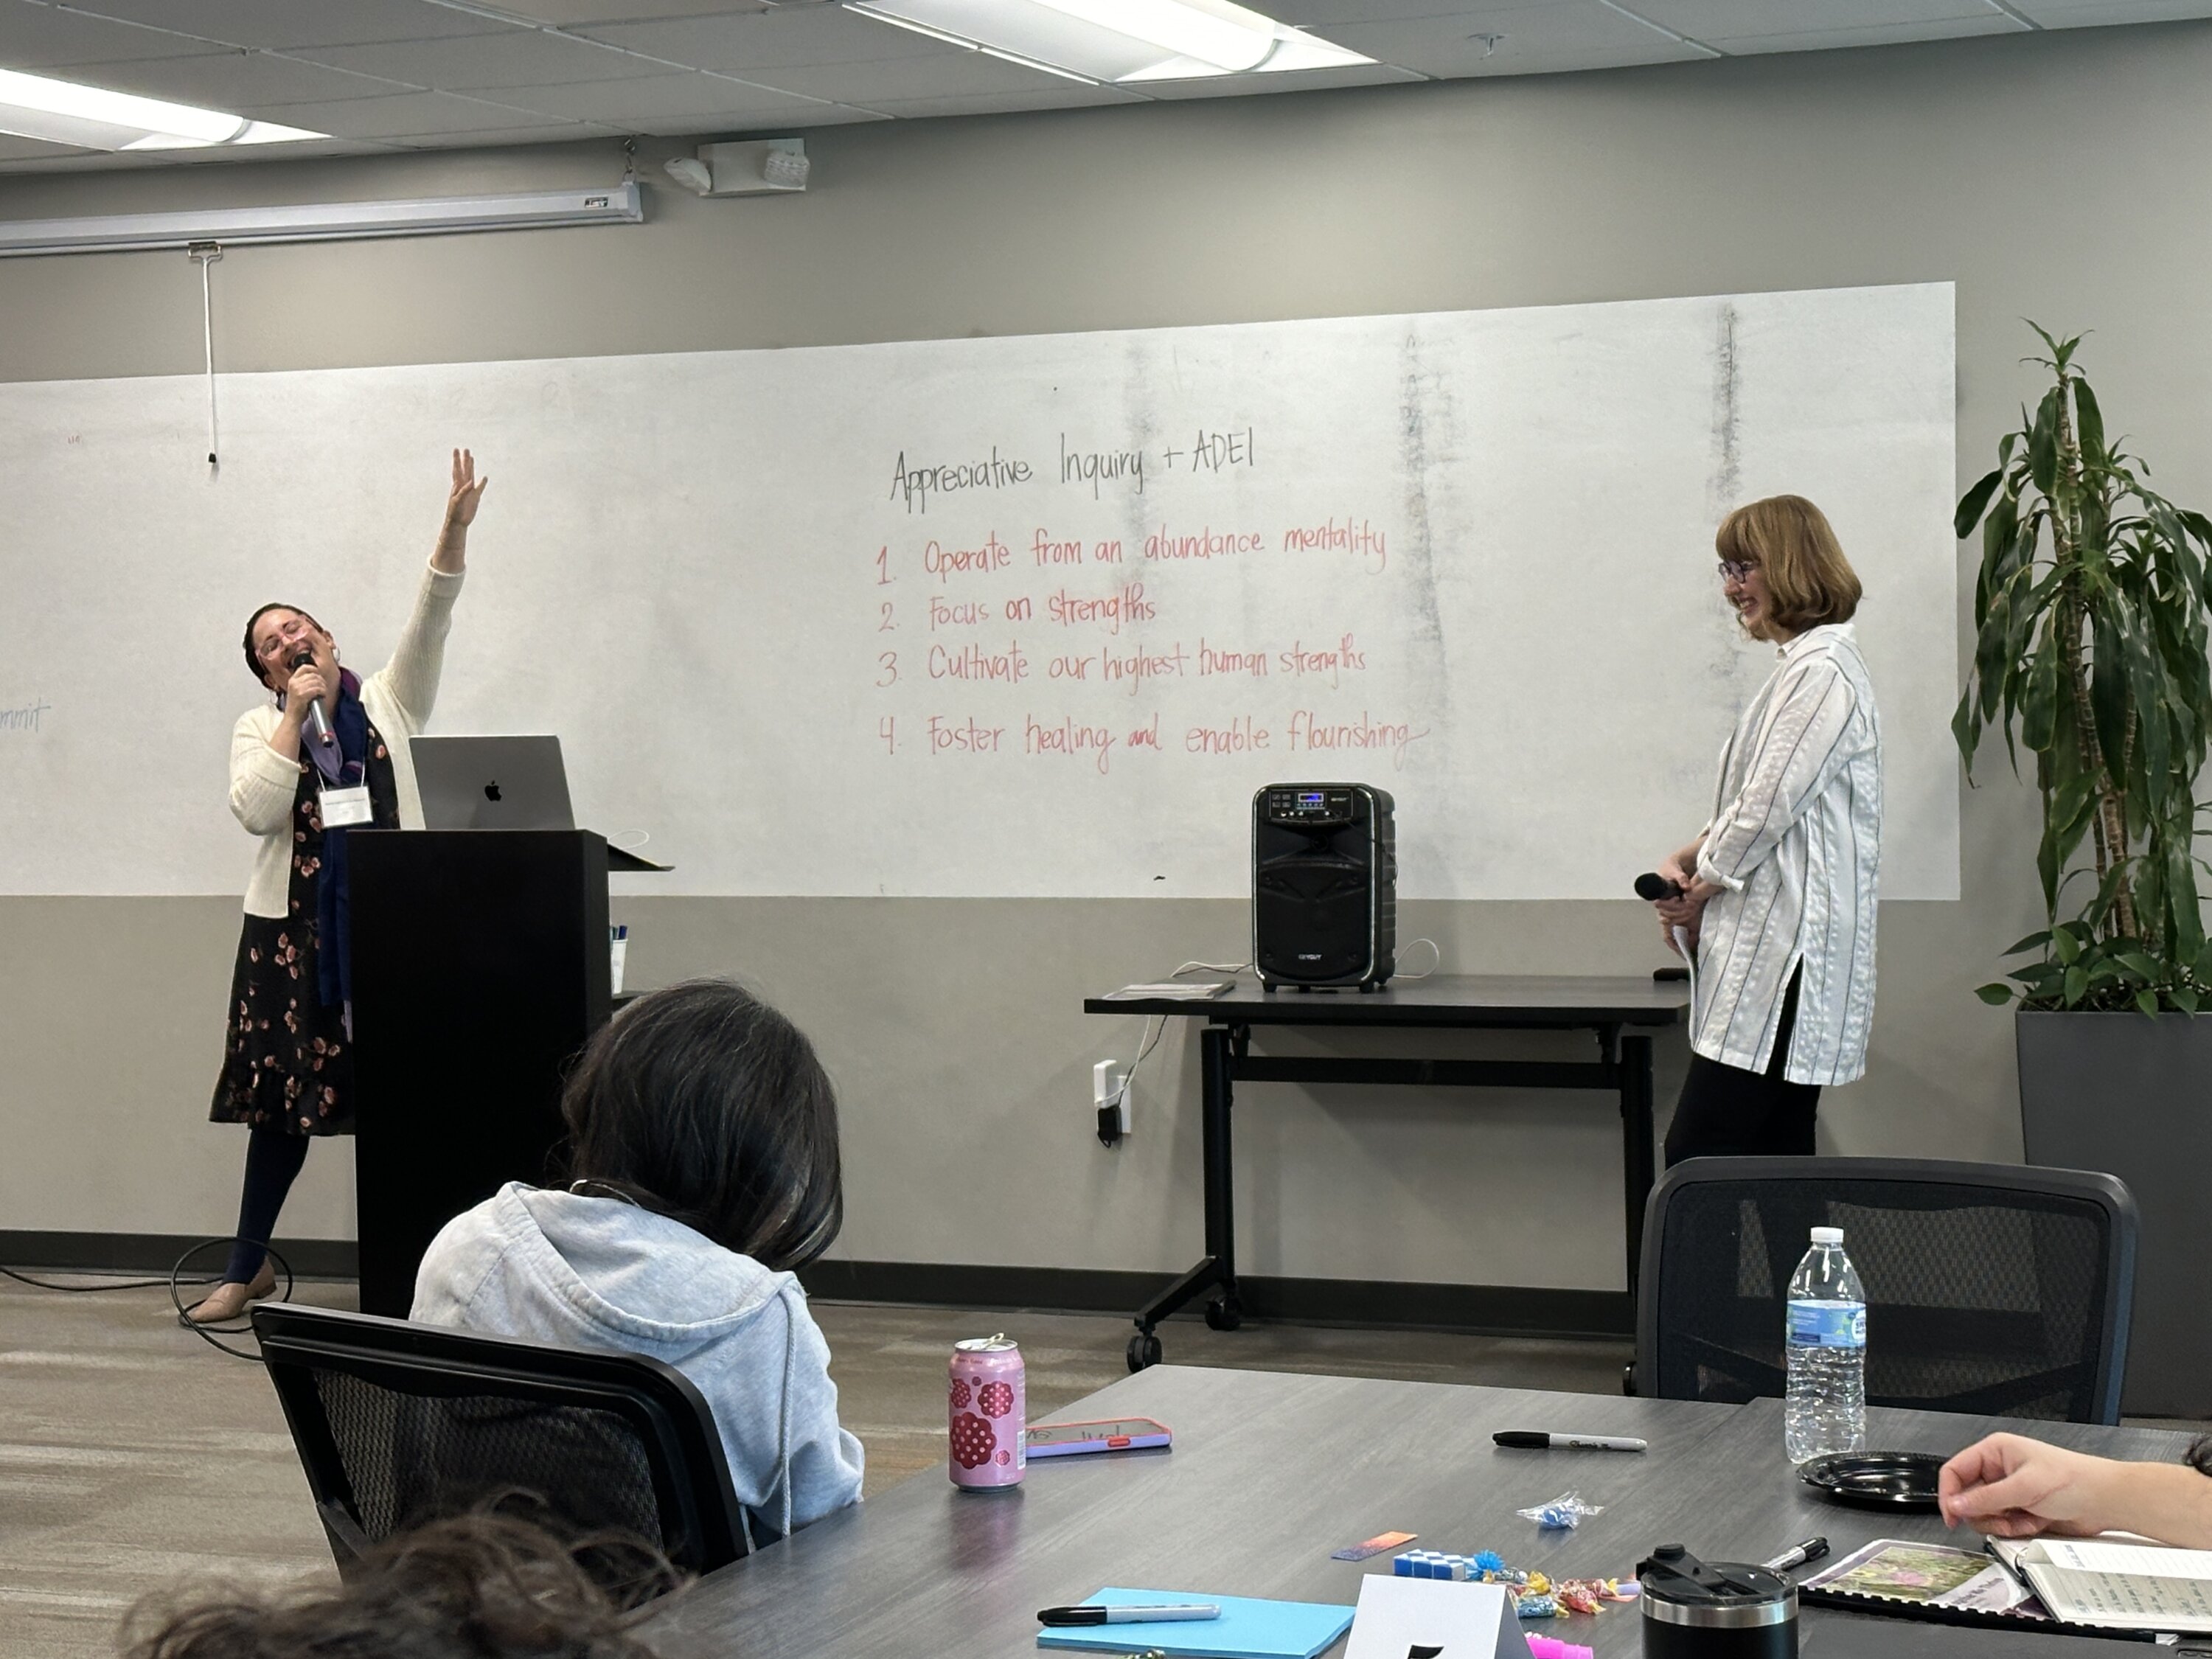 Consultants Pamela Espinosa de los Monteros (left) and Janice Jaguszewski (right) thank participants and provide an overview of Appreciative Inquiry and its role in ADEI work.